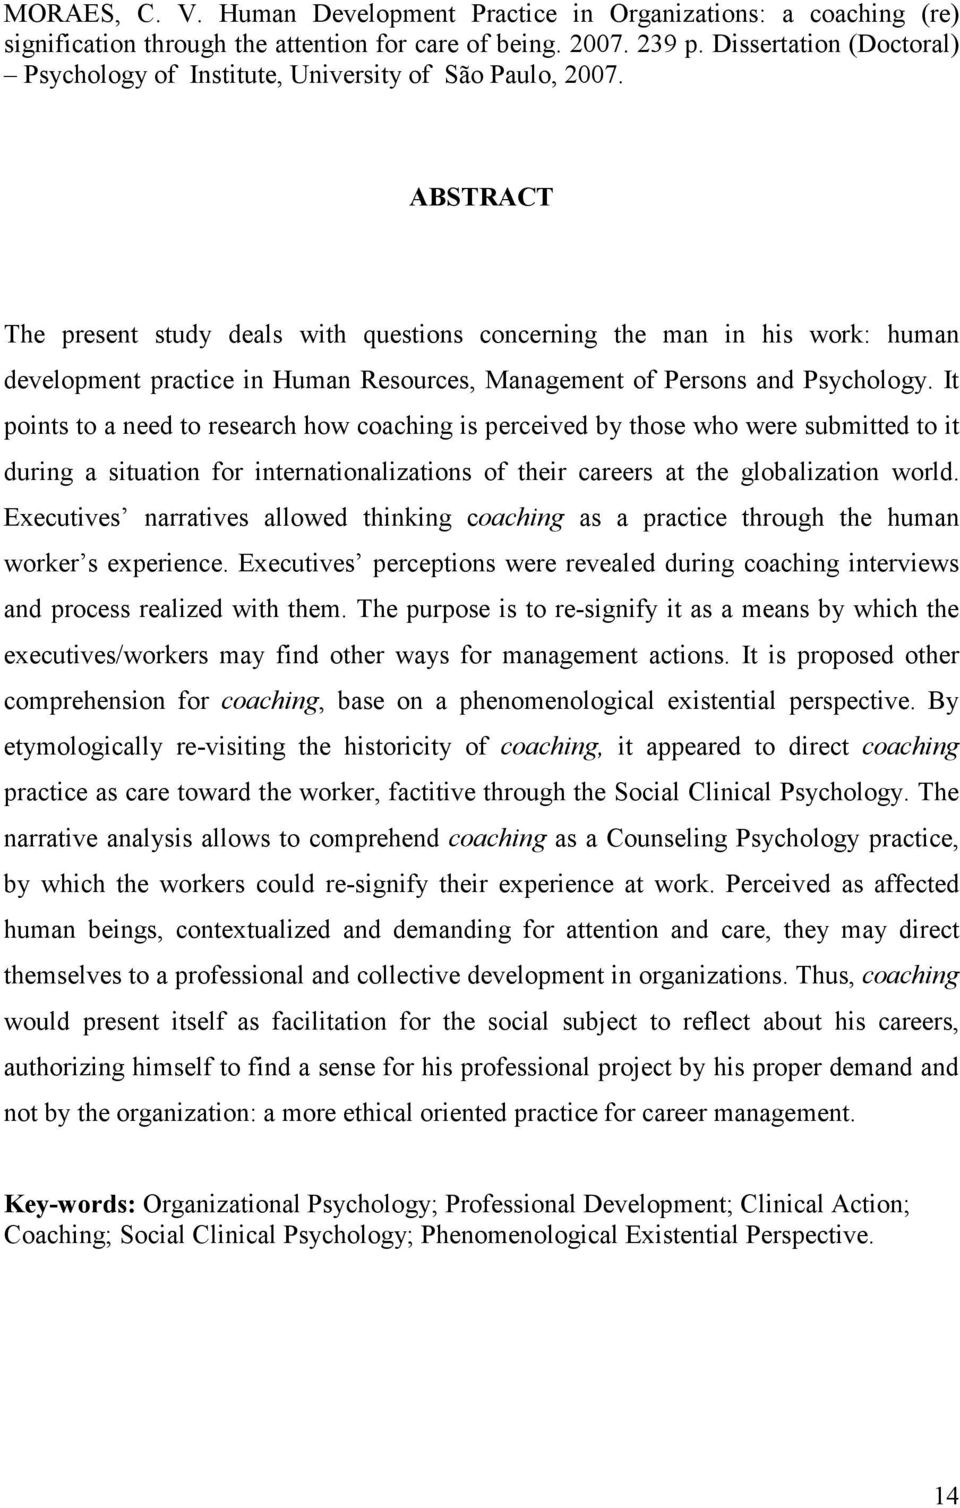 ABSTRACT The present study deals with questions concerning the man in his work: human development practice in Human Resources, Management of Persons and Psychology.